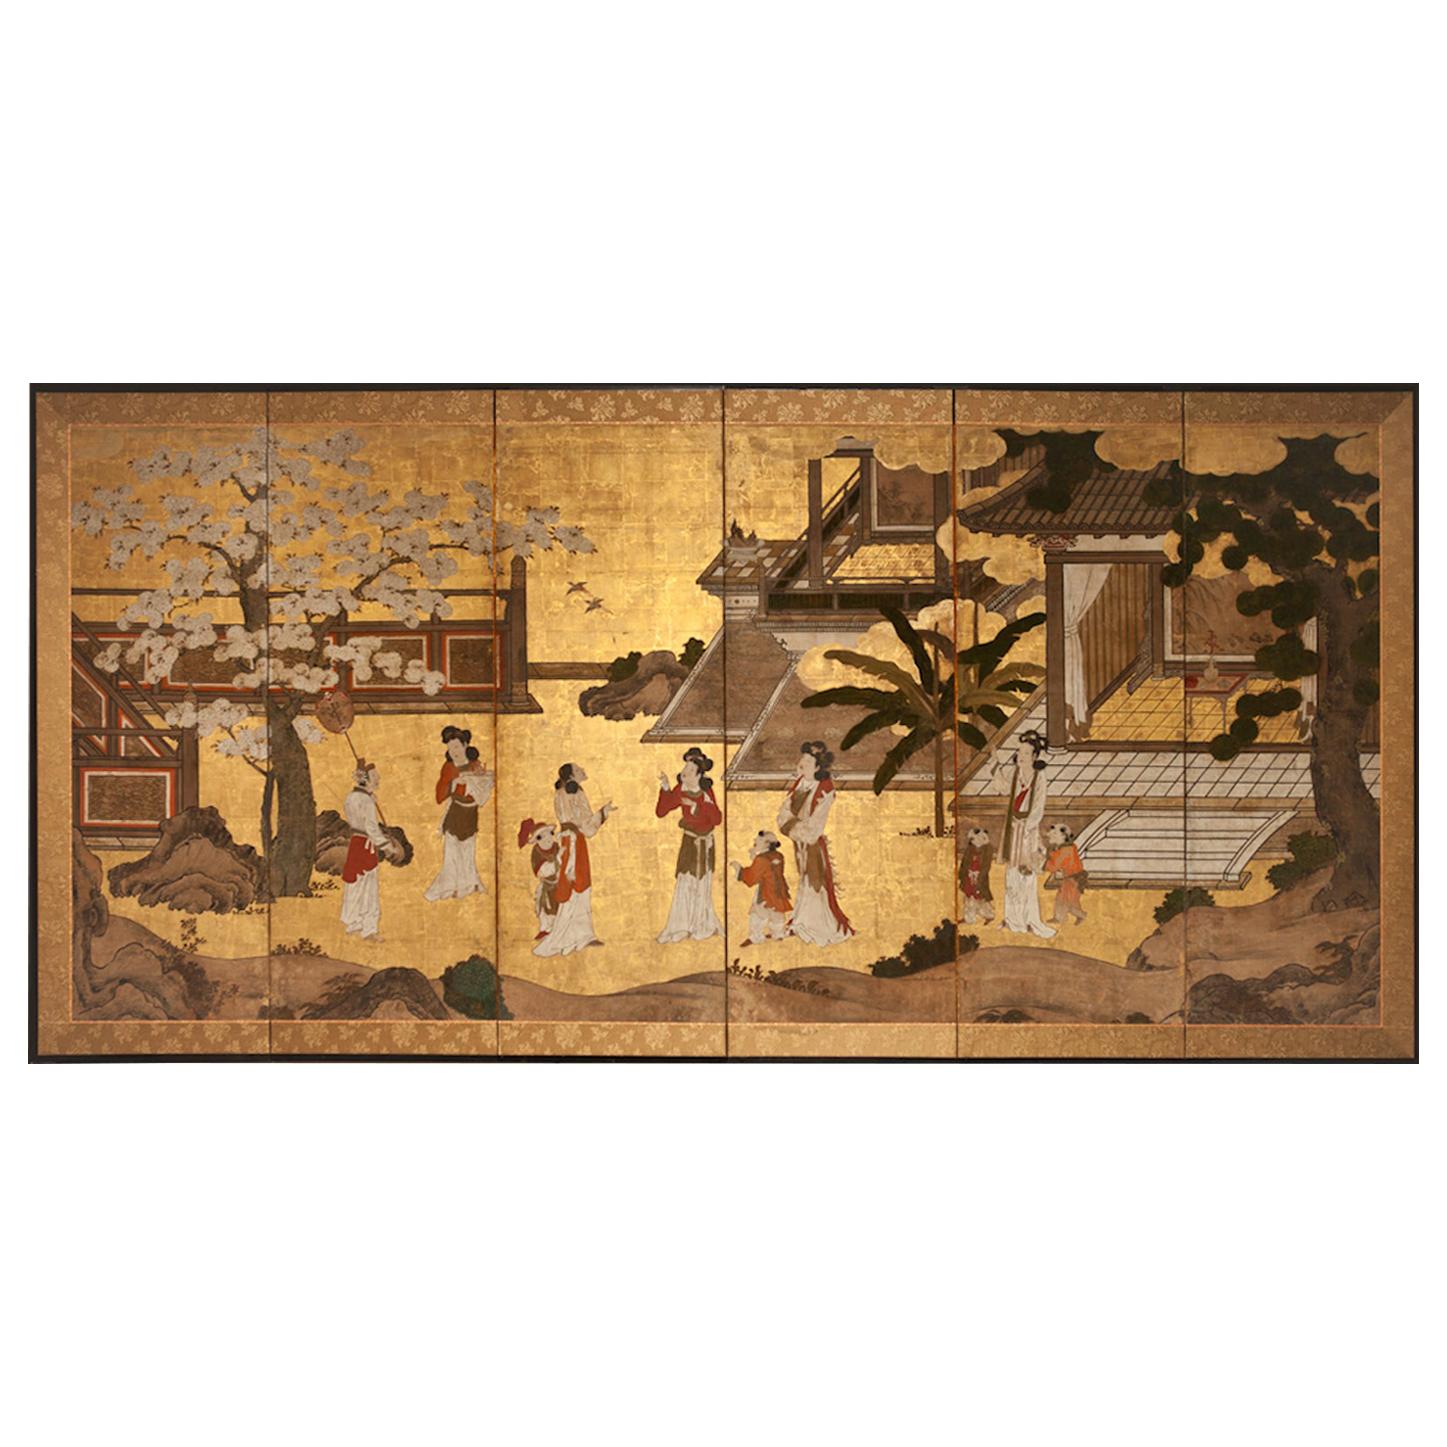 Japanese six-panel screen: Women of the Court in the Garden. Edo period (circa 1700) painting of an early Kano school subject matter: nobility socializing in a coutryard garden. Details of finery are painted throughout, including a screen that is